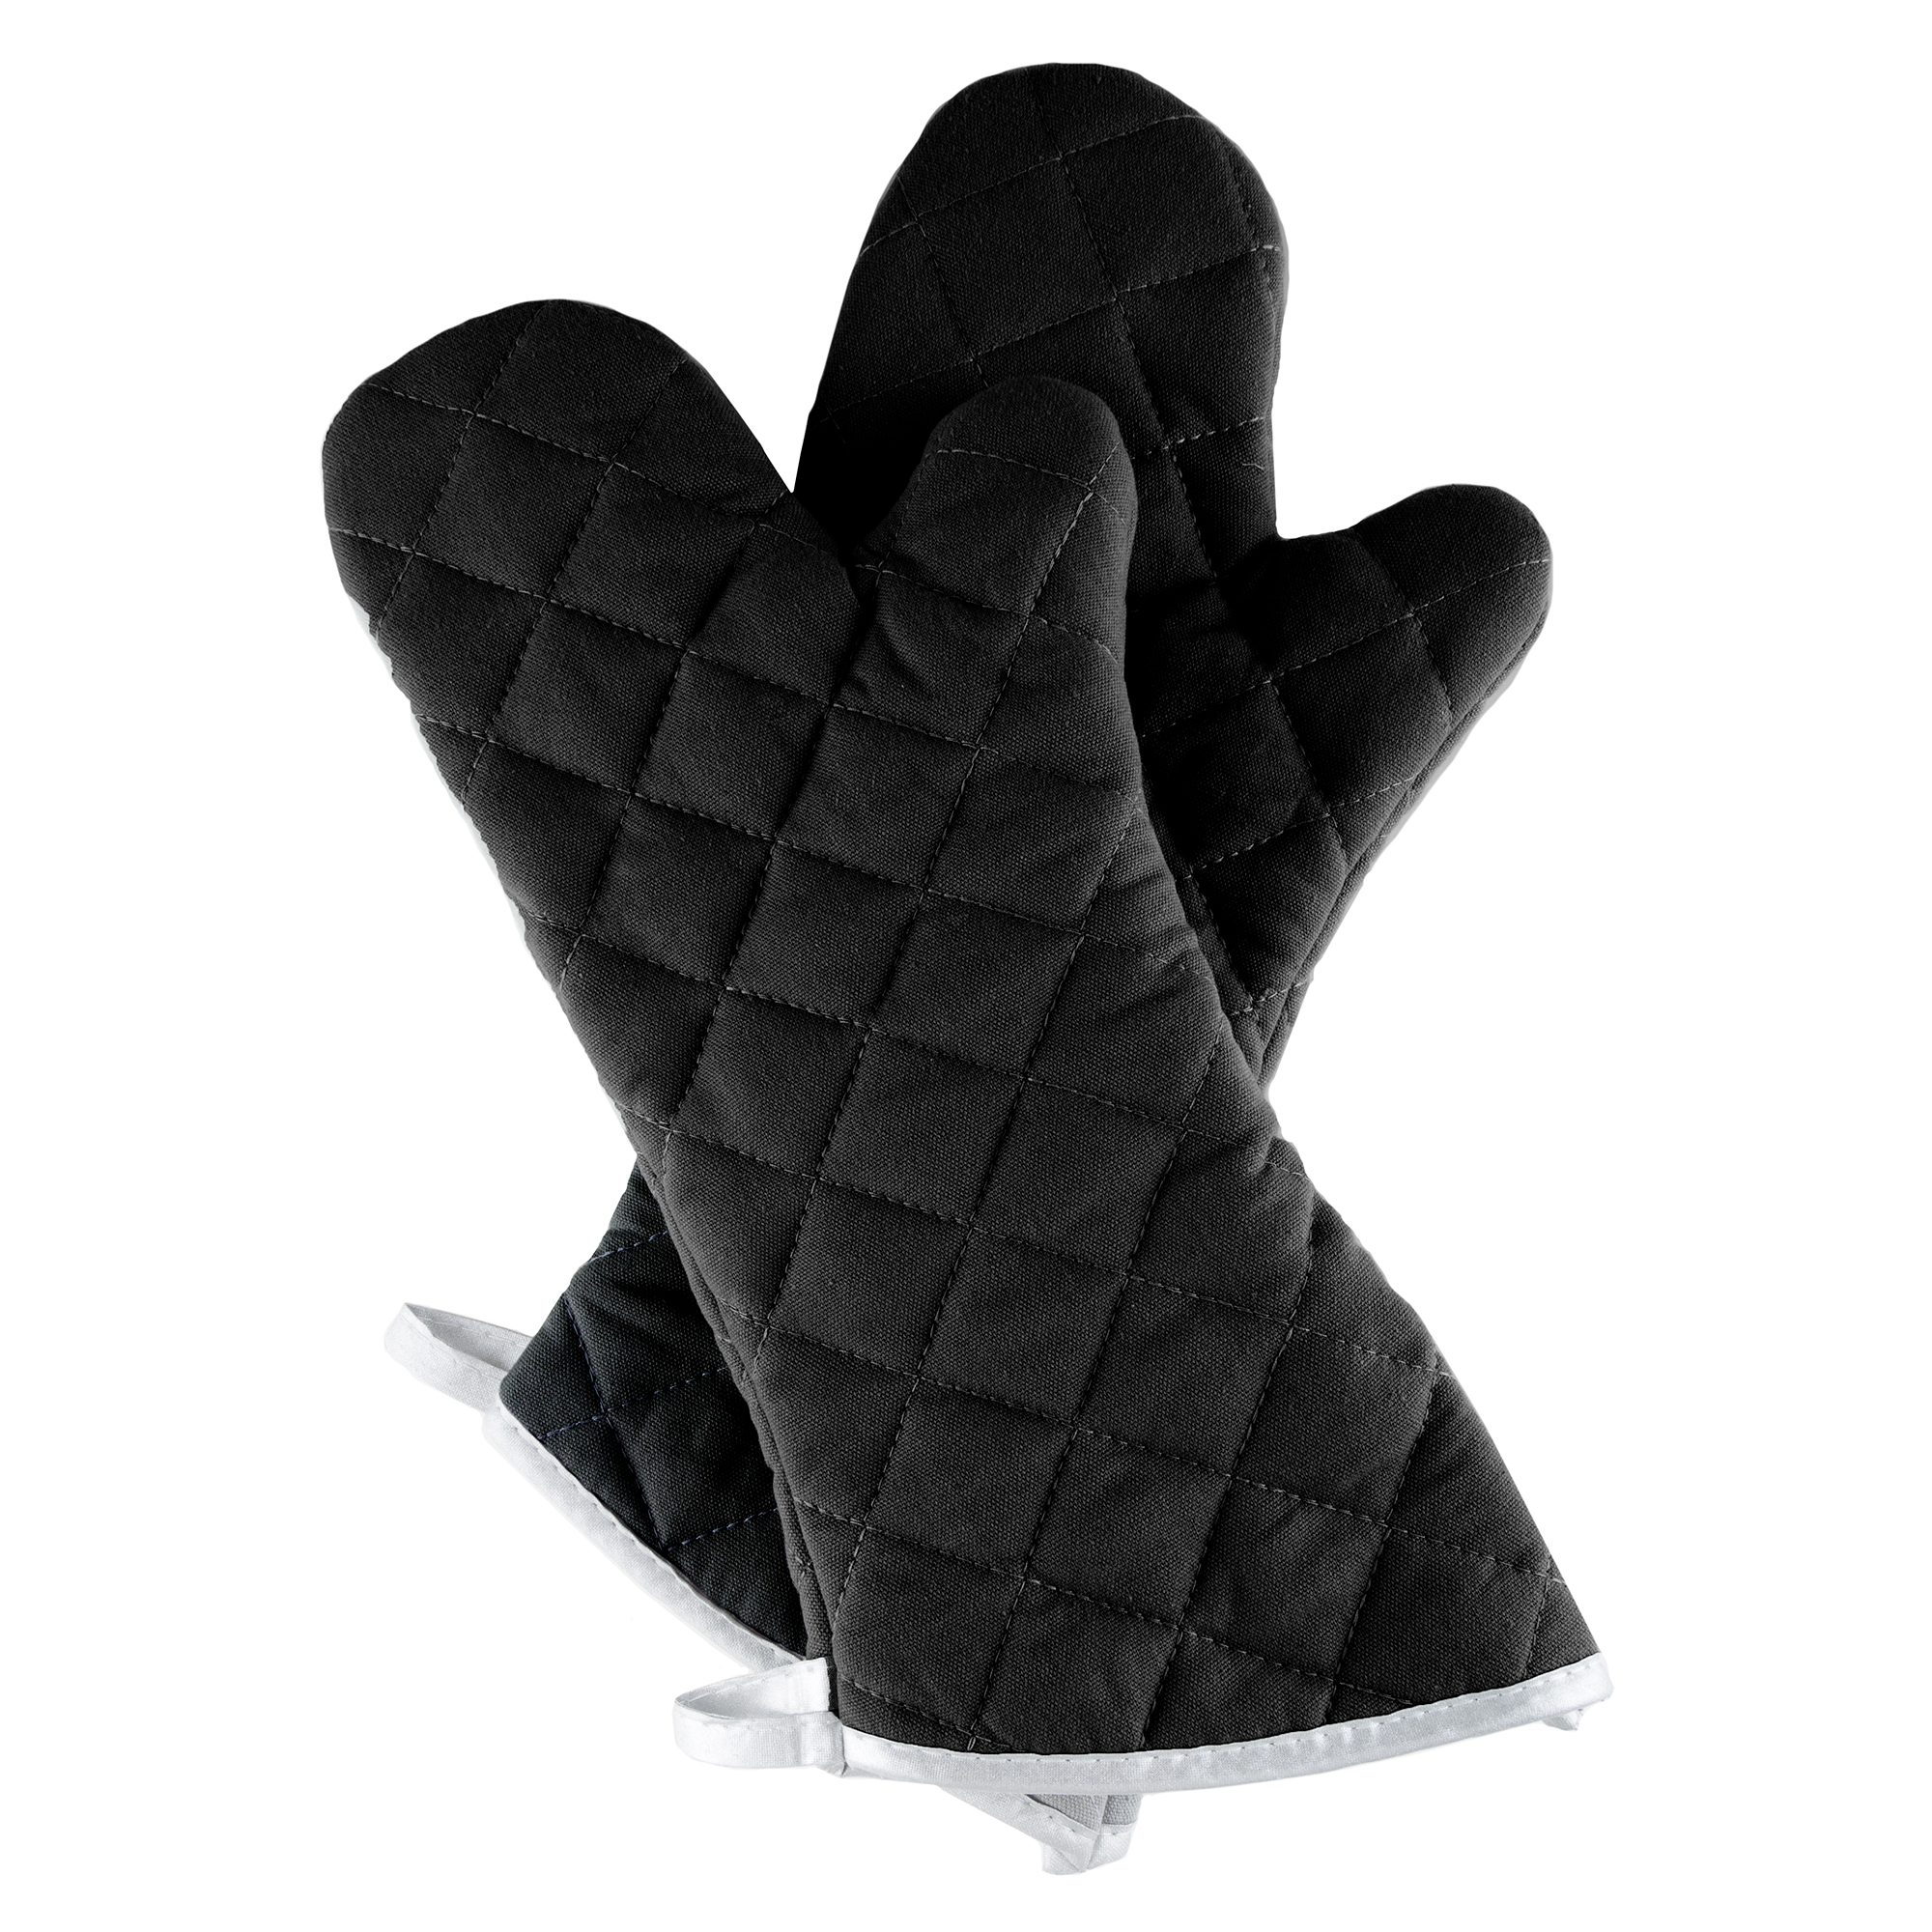 Oven Mitt One Pair Oversized Flame Heat Protection Big Mittens Pot Holders Black